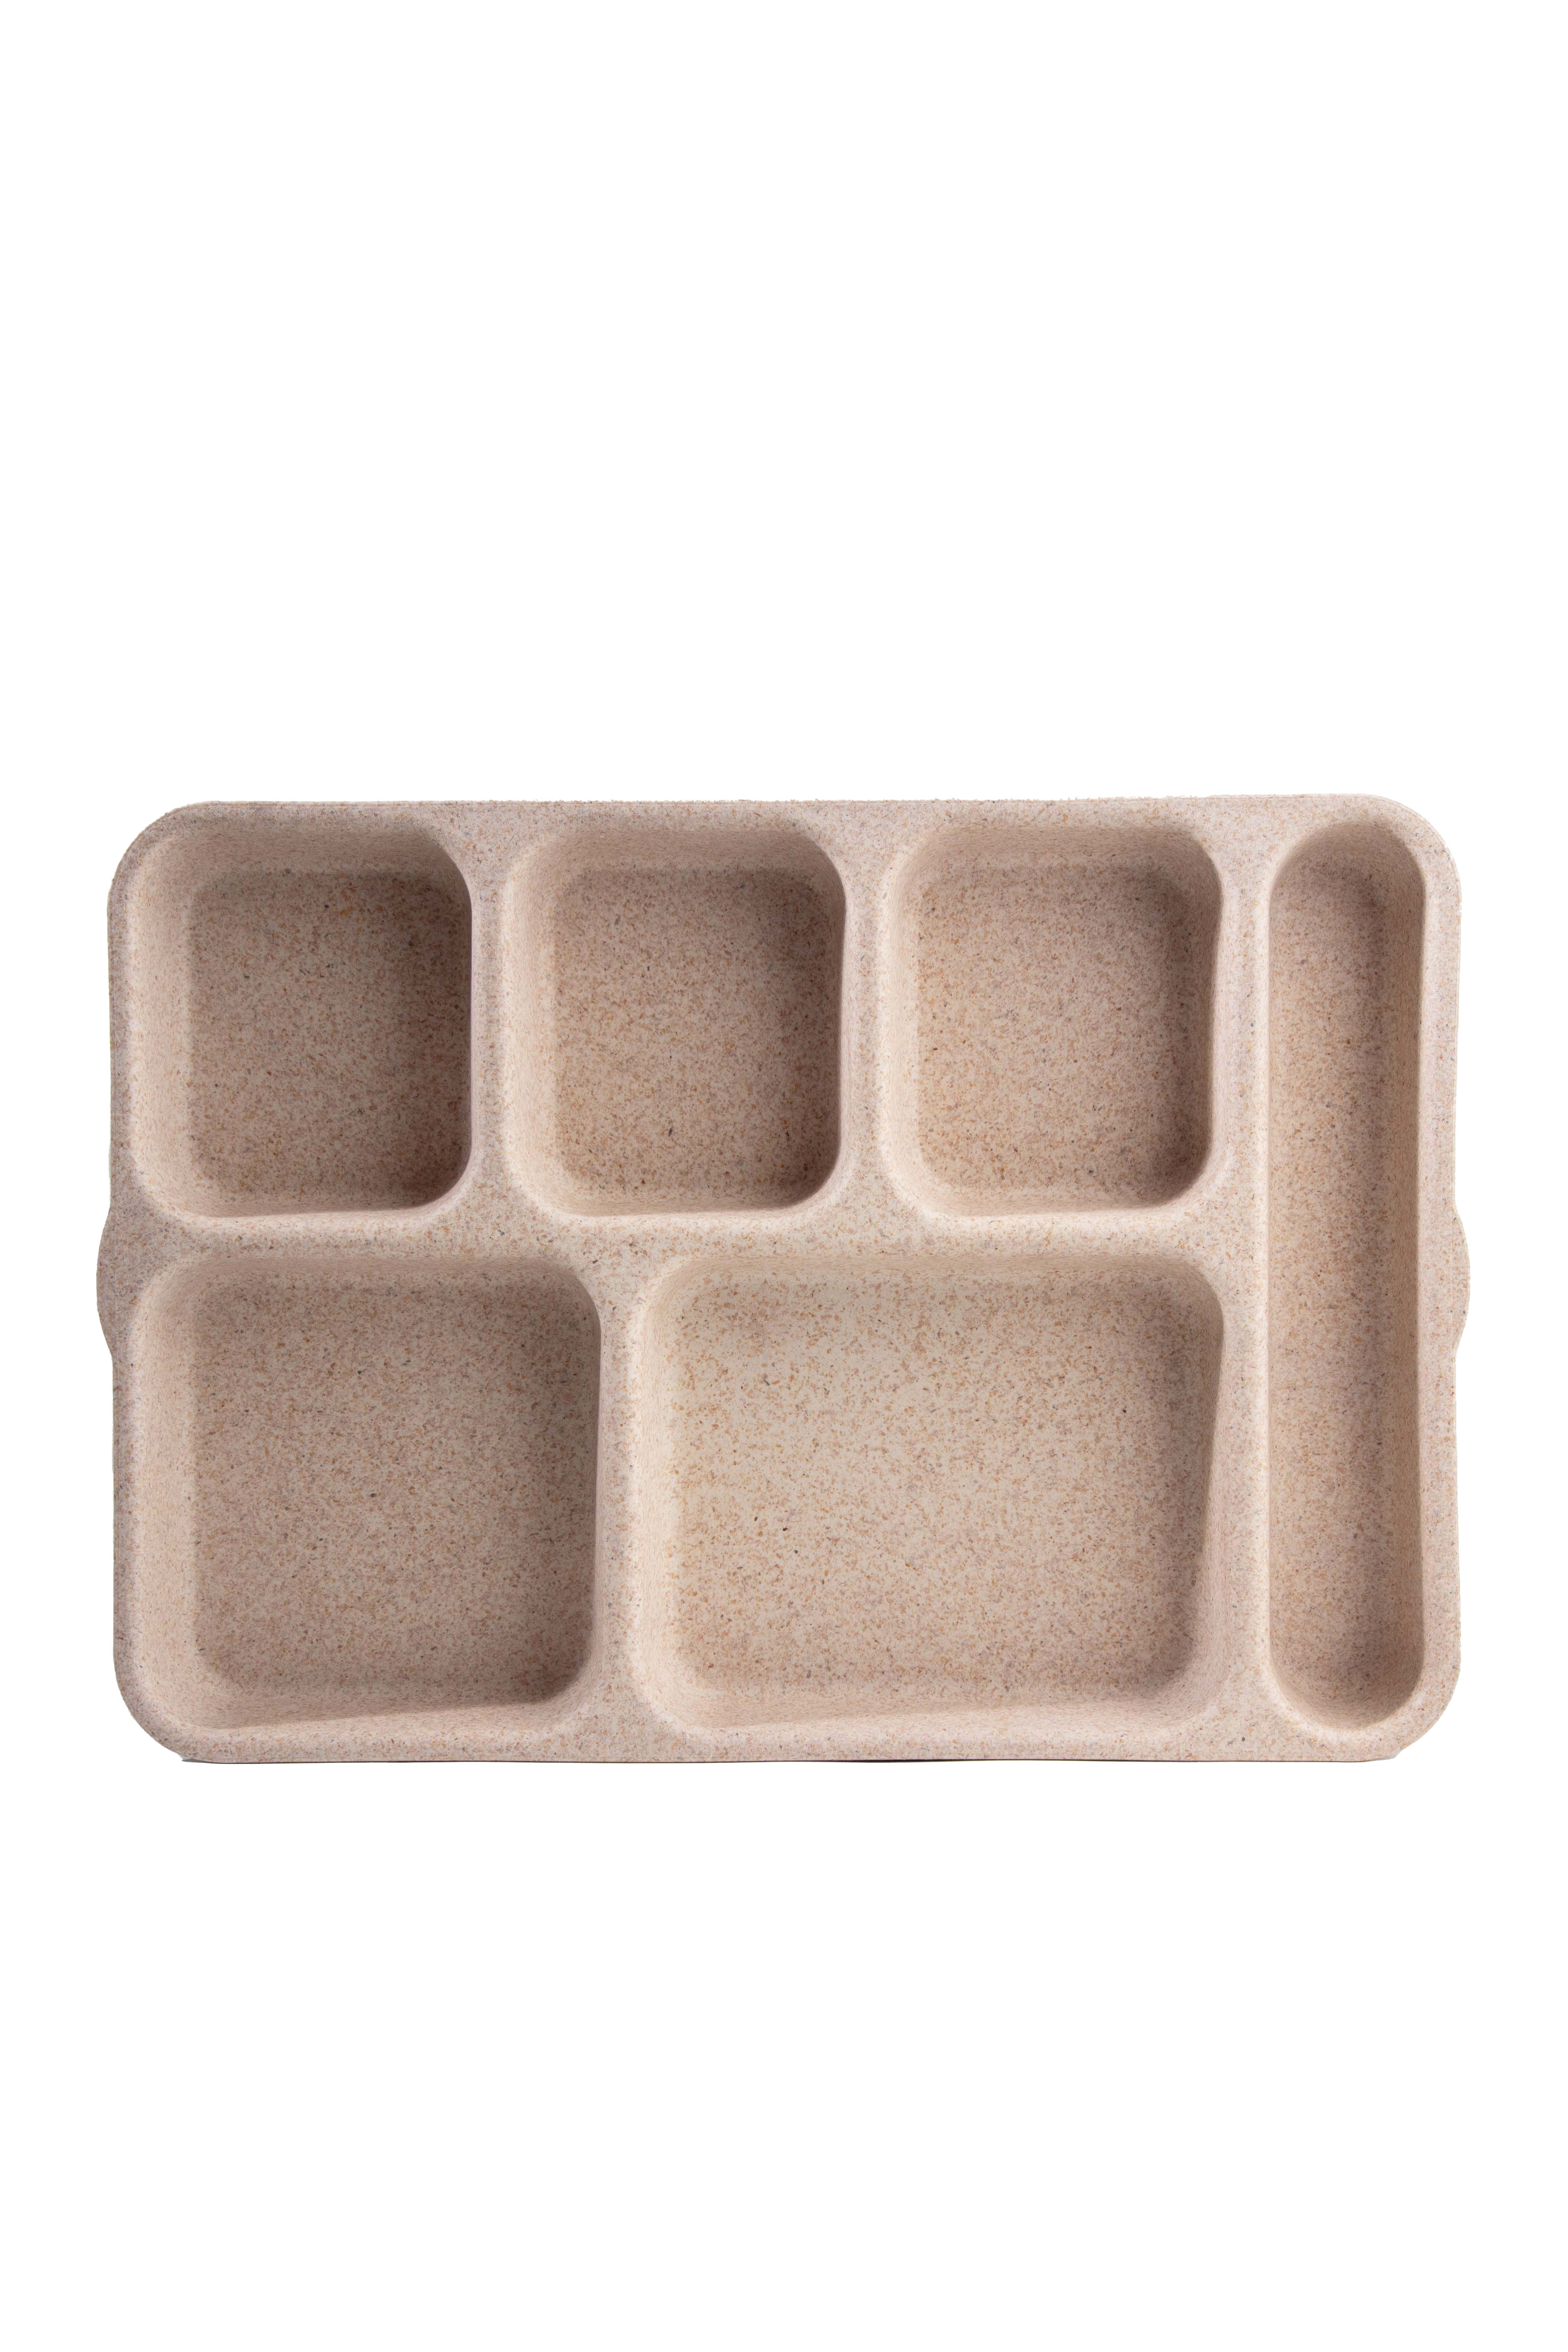 SUSTAINABLE FOOD TRAY - ANTI MICROBIAL